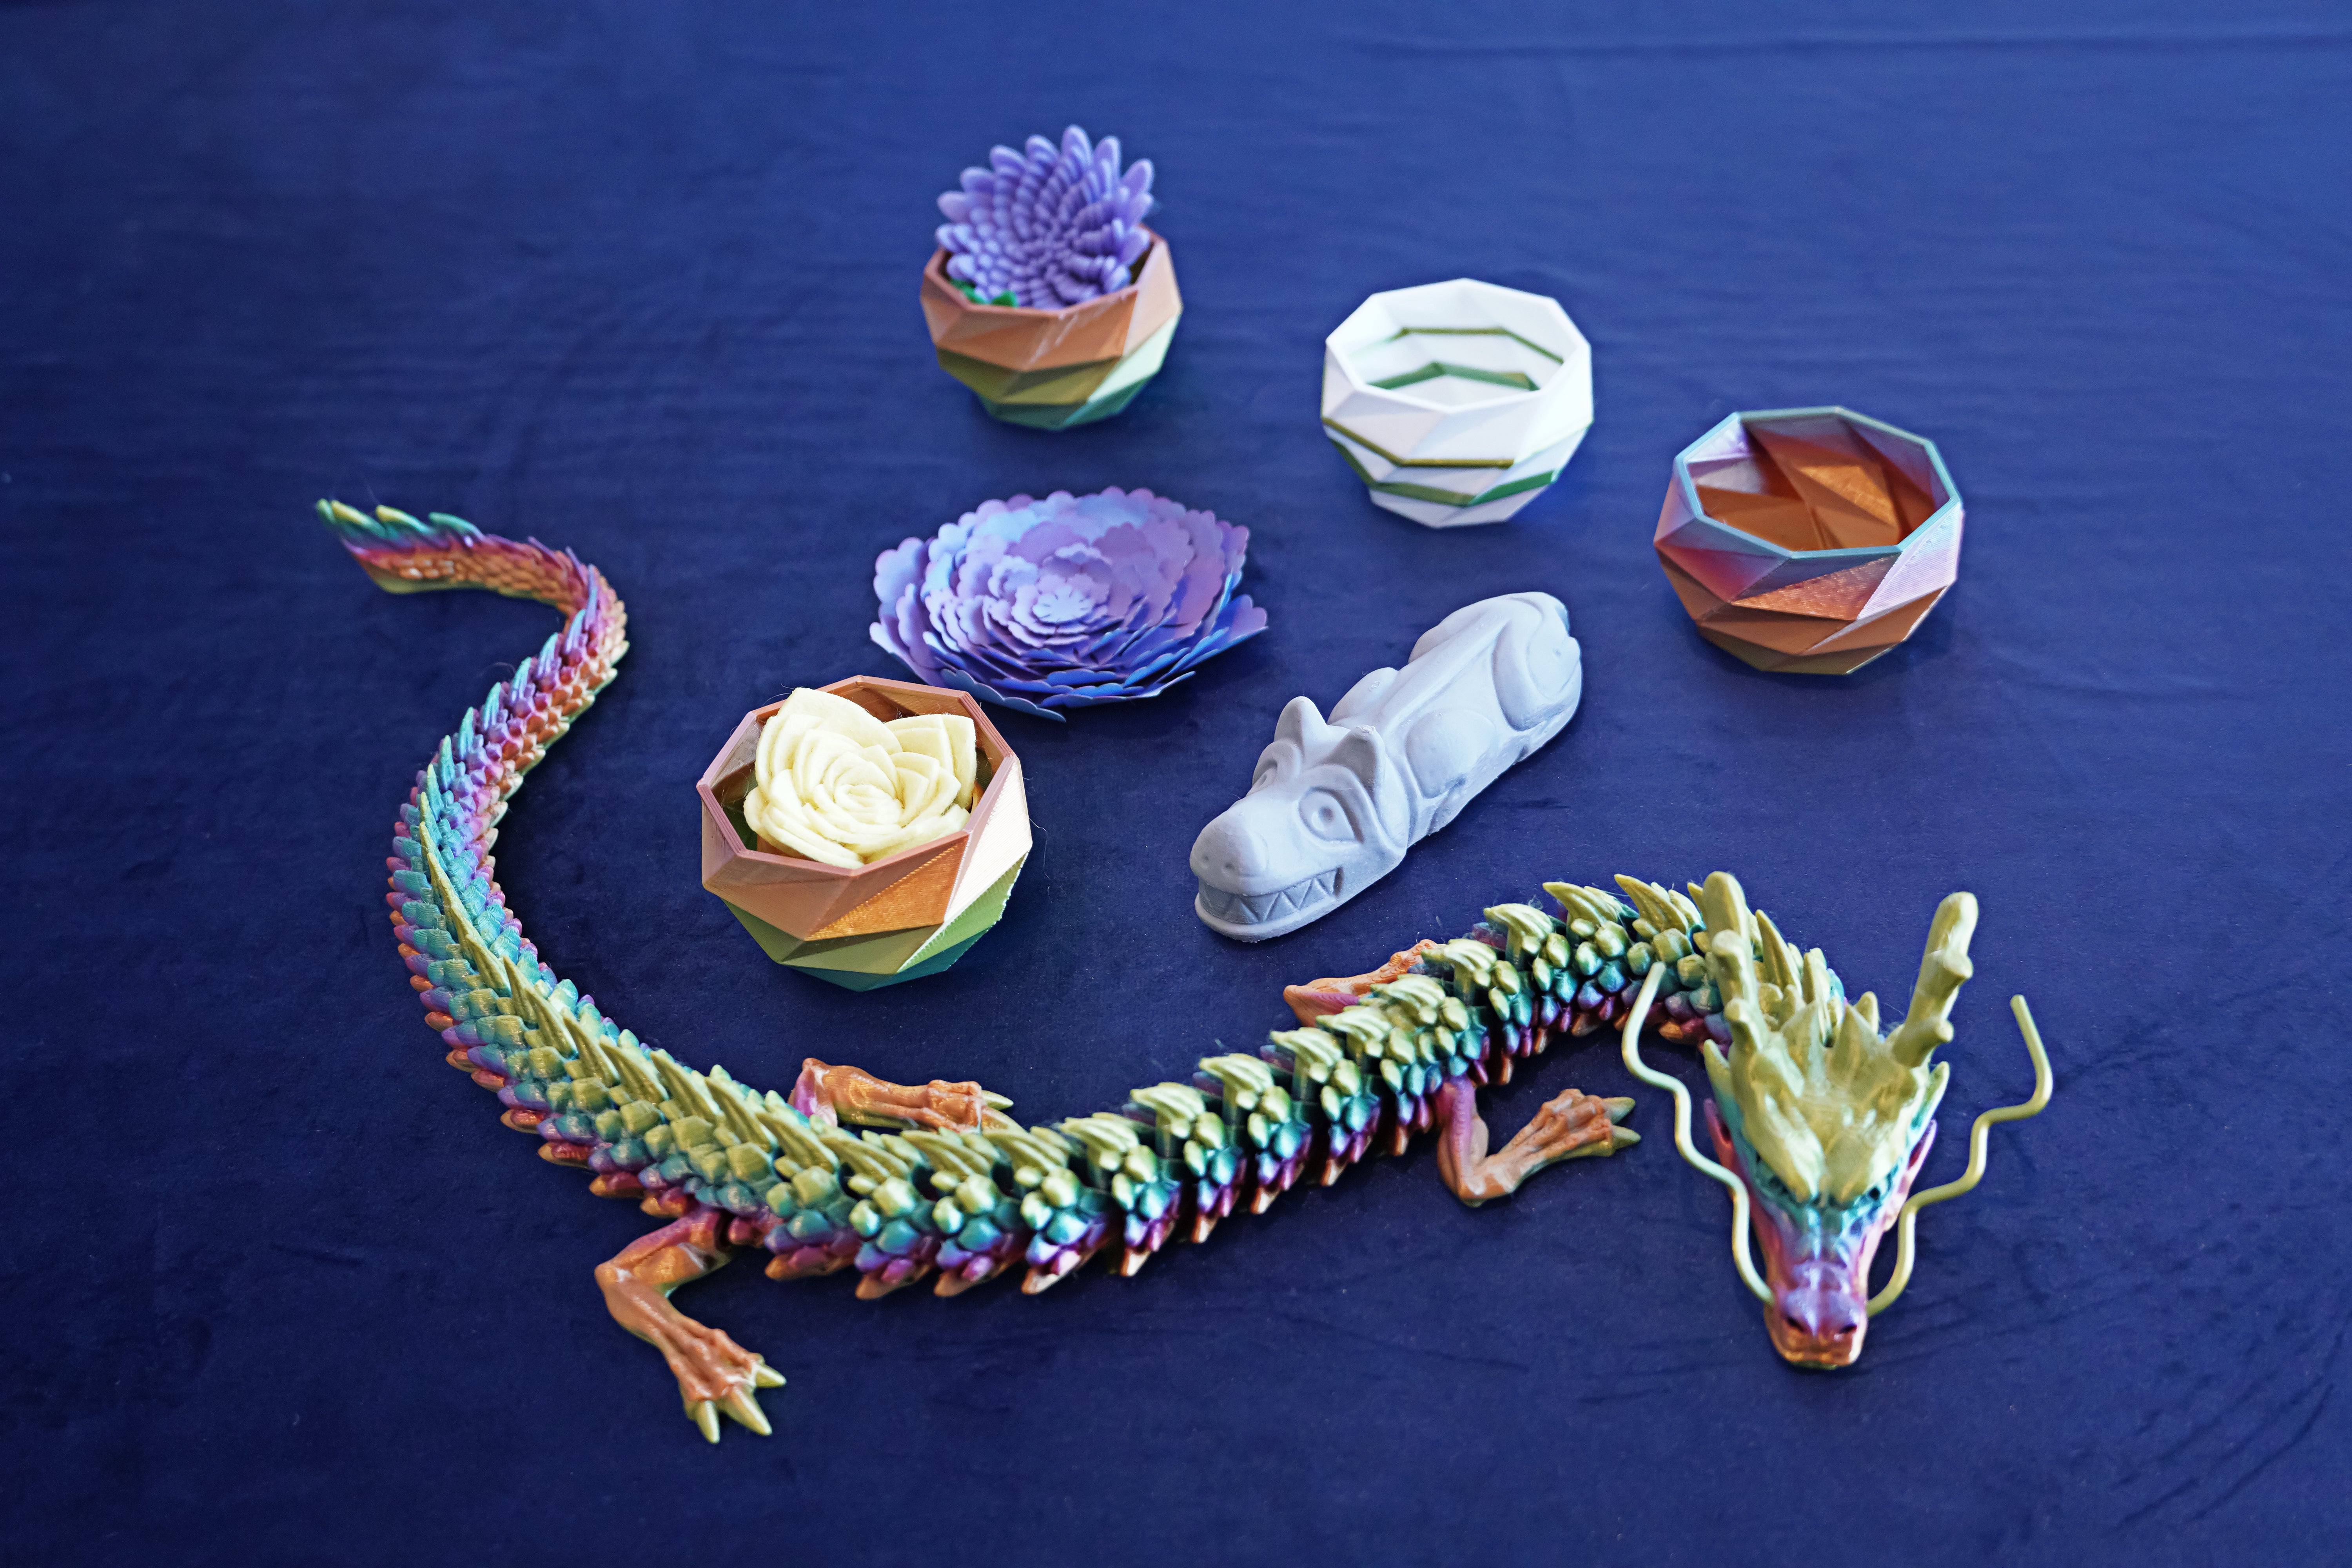 An assortment of 3-D printed toys are displayed, including a colorful dragon and some succulents.